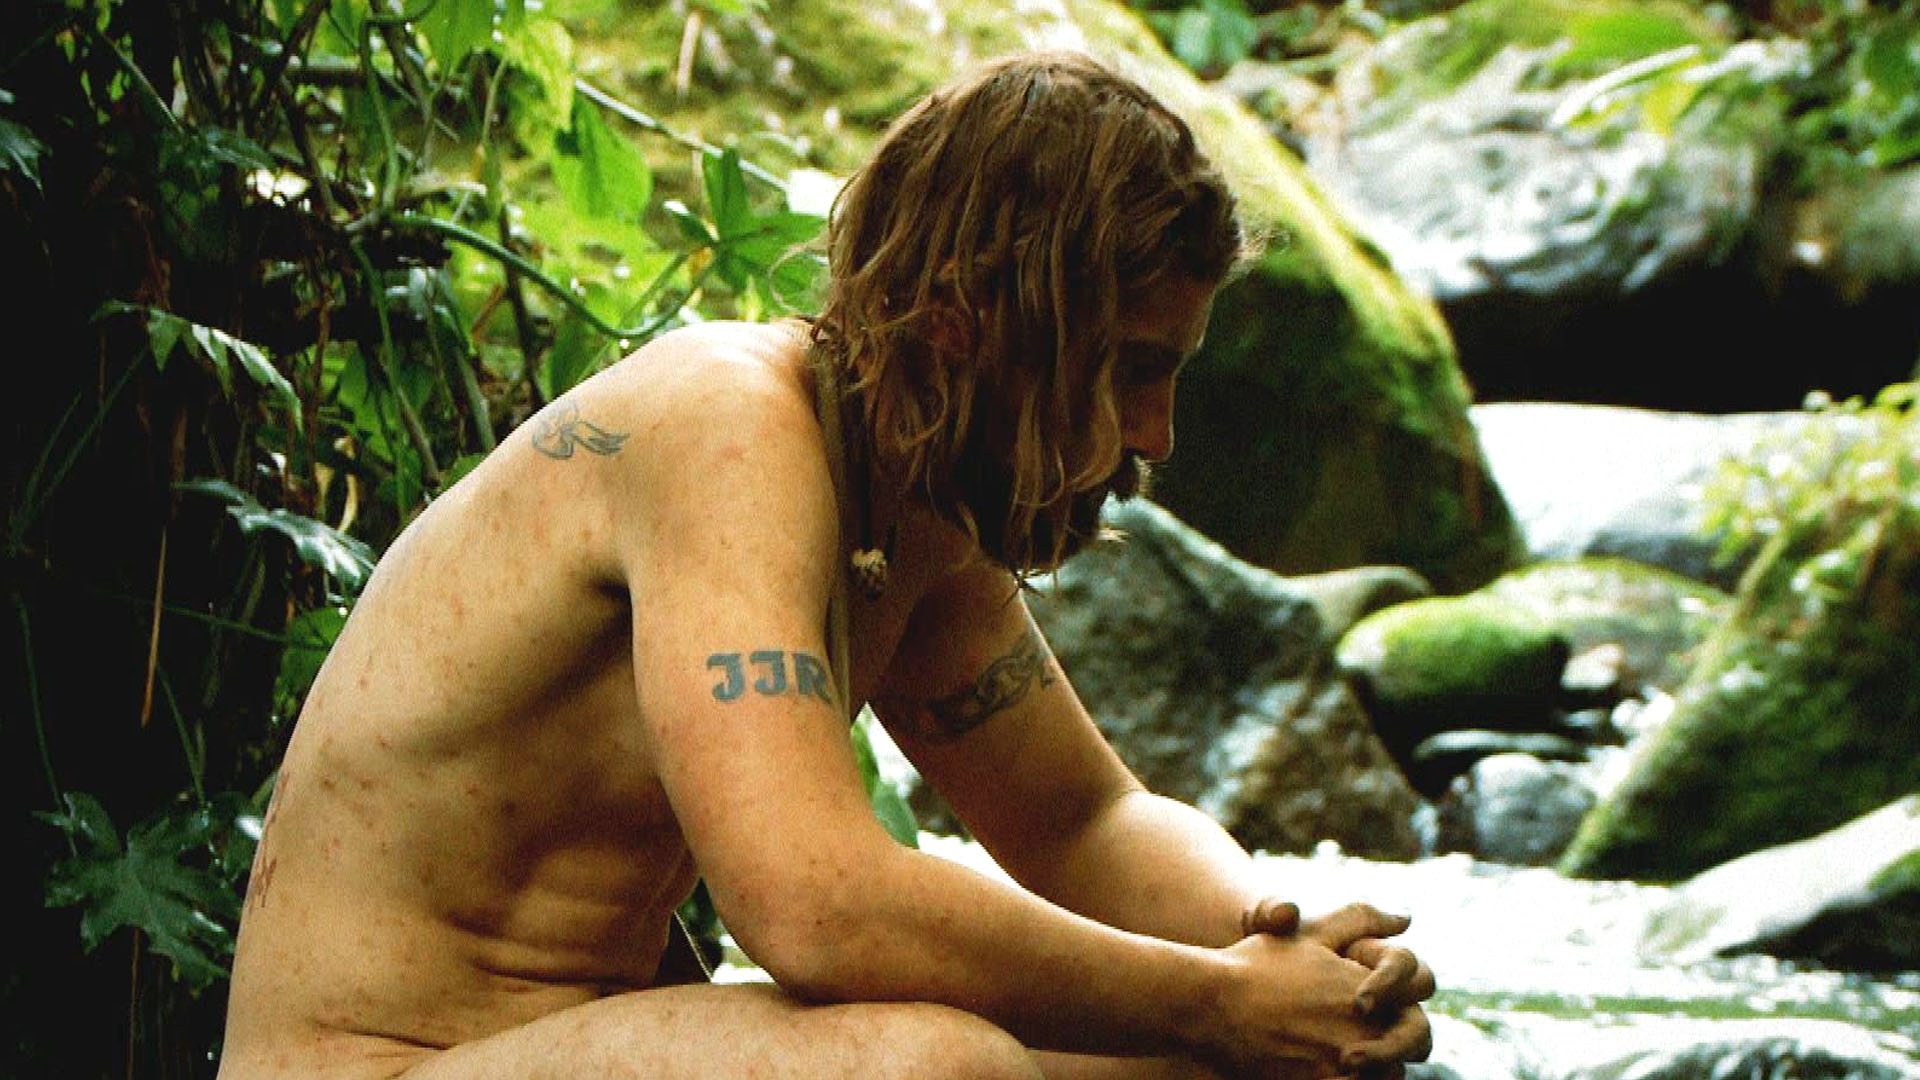 Superfans and Survivalists Take on the Unknown in the New Season of "Naked and Afraid"